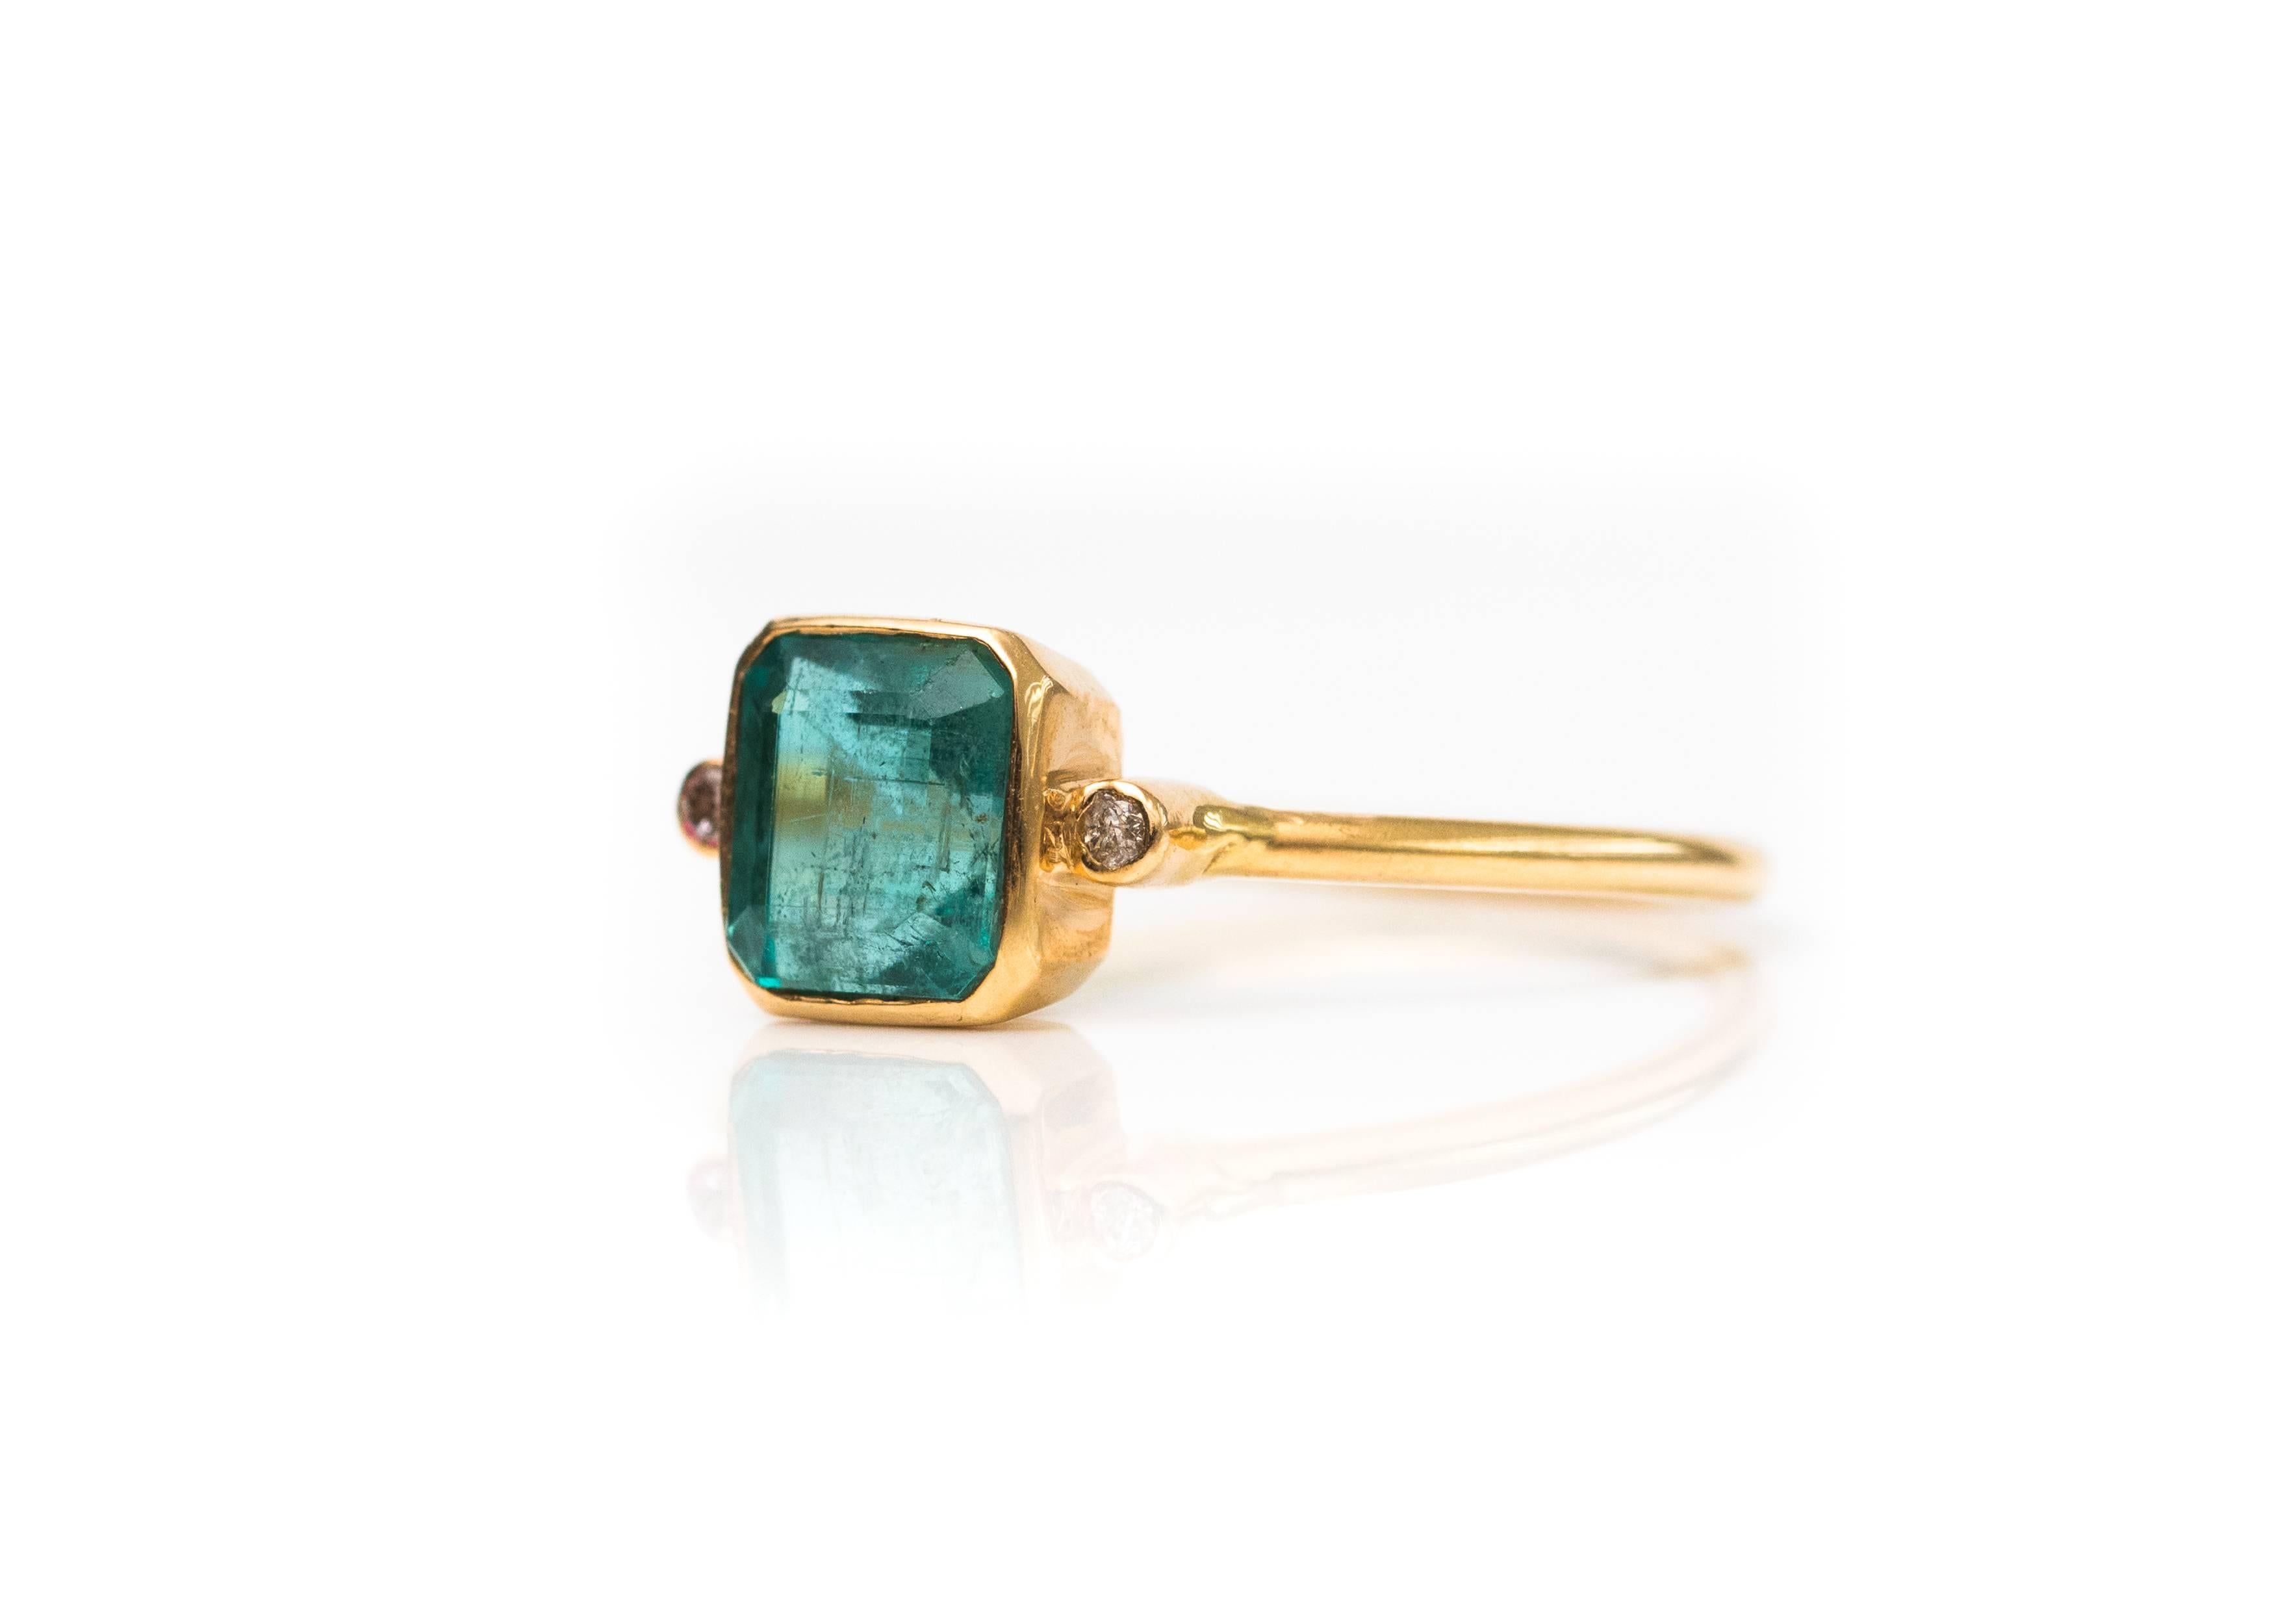 1.00 carat Radiant cut Emerald with Diamonds and 18 Karat Yellow Gold Ring

Features a 1.0 carat deep blue South American Emerald center stone, Round Brilliant Diamonds and 18 Karat Yellow Gold. The stunning Radiant cut Emerald center stone is bezel